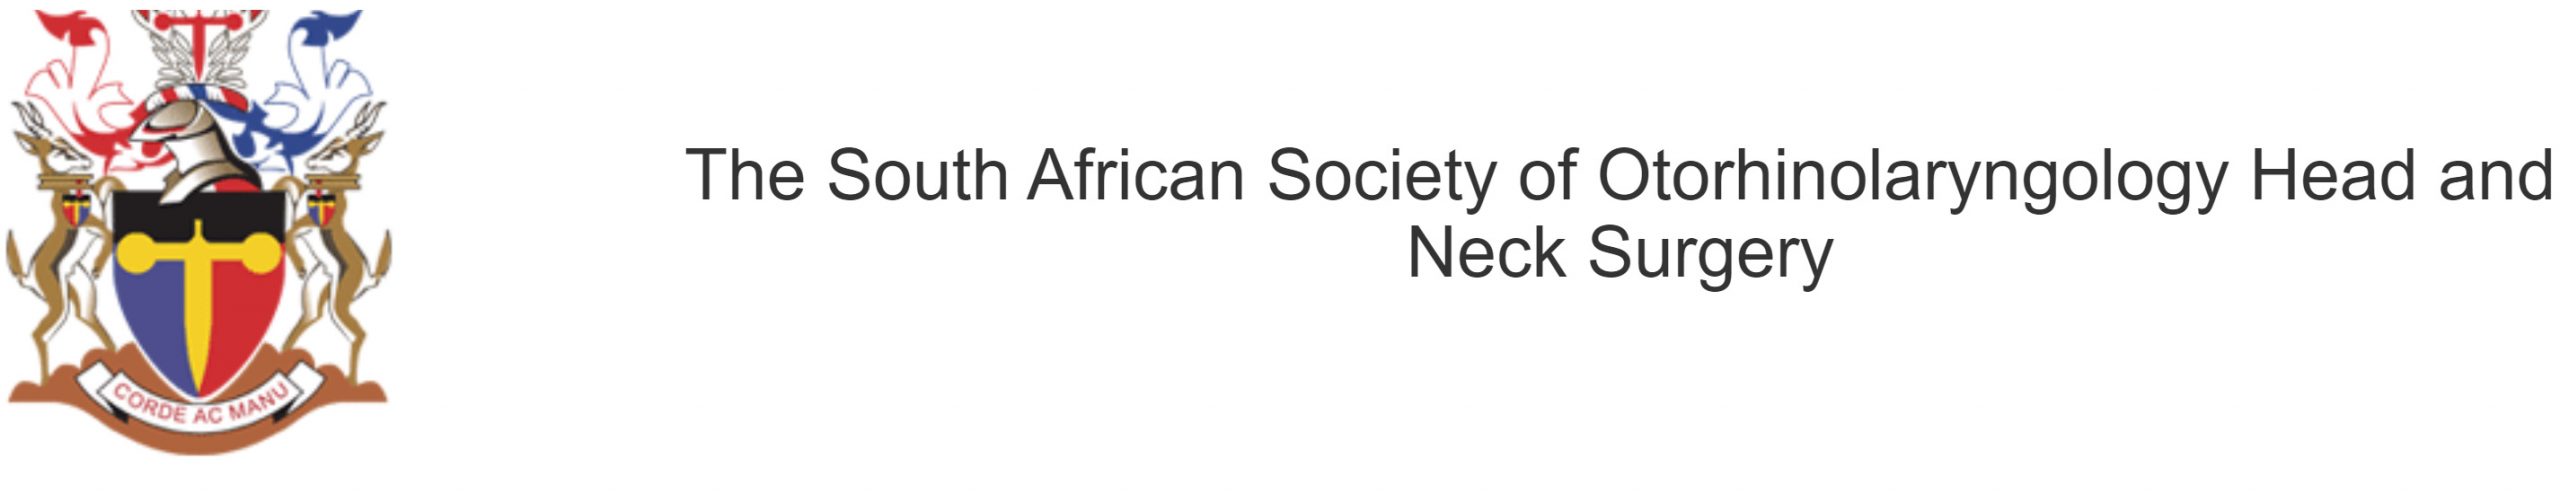 South African Society of Otorhinolaryngology Head and Neck Surgery 56th South African ENT Virtual Conference 2020